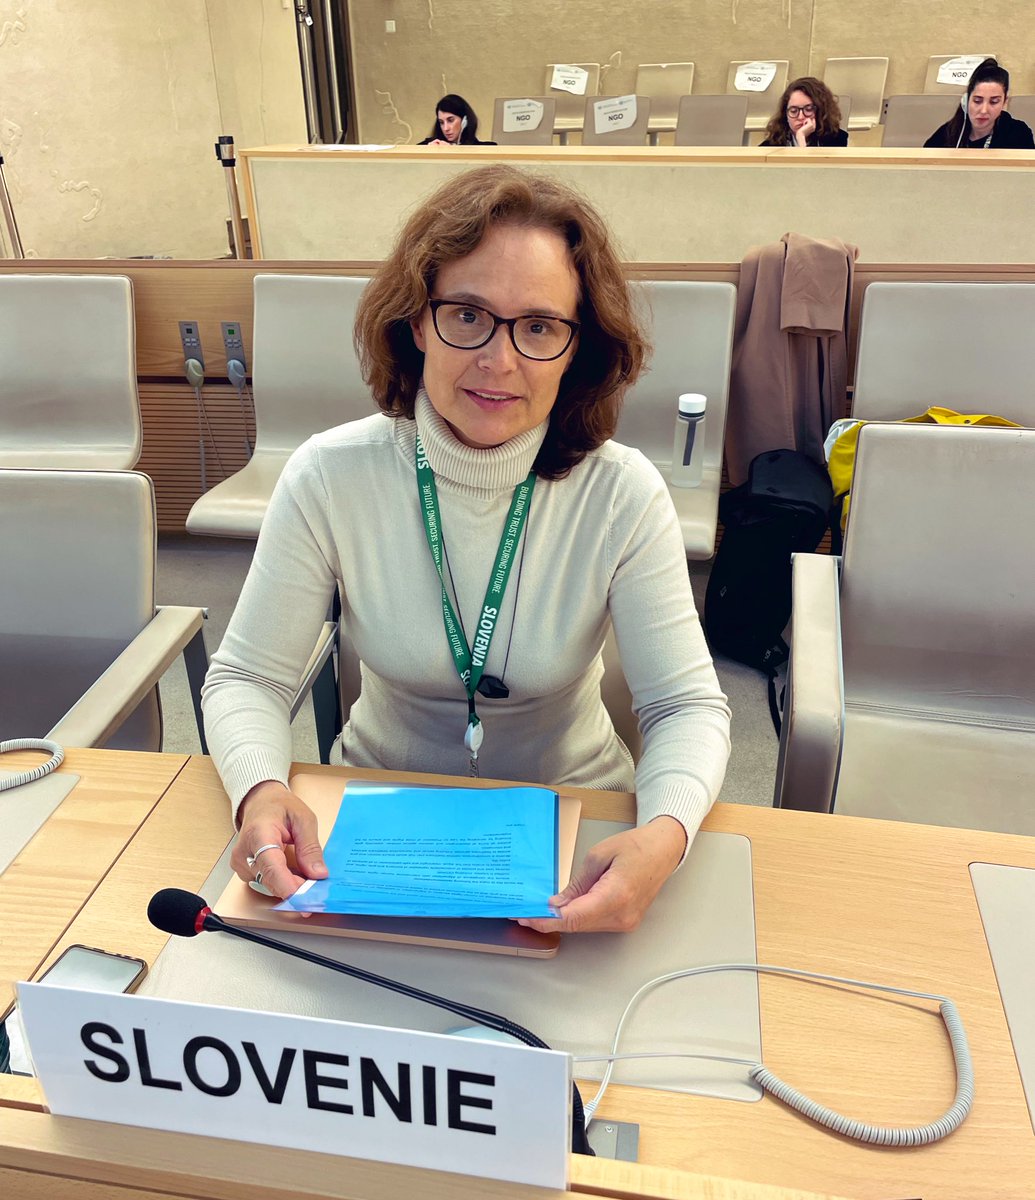 During #UPR46 review of Afghanistan, 🇸🇮 expressed serious concerns over human rights records in the country and recommended 🇦🇫 to: ▫️ensure compliance with int. obligations, incl. #CEDAW ▫️reverse unacceptable repression of #women & #girls ▫️prohibit violence against #children